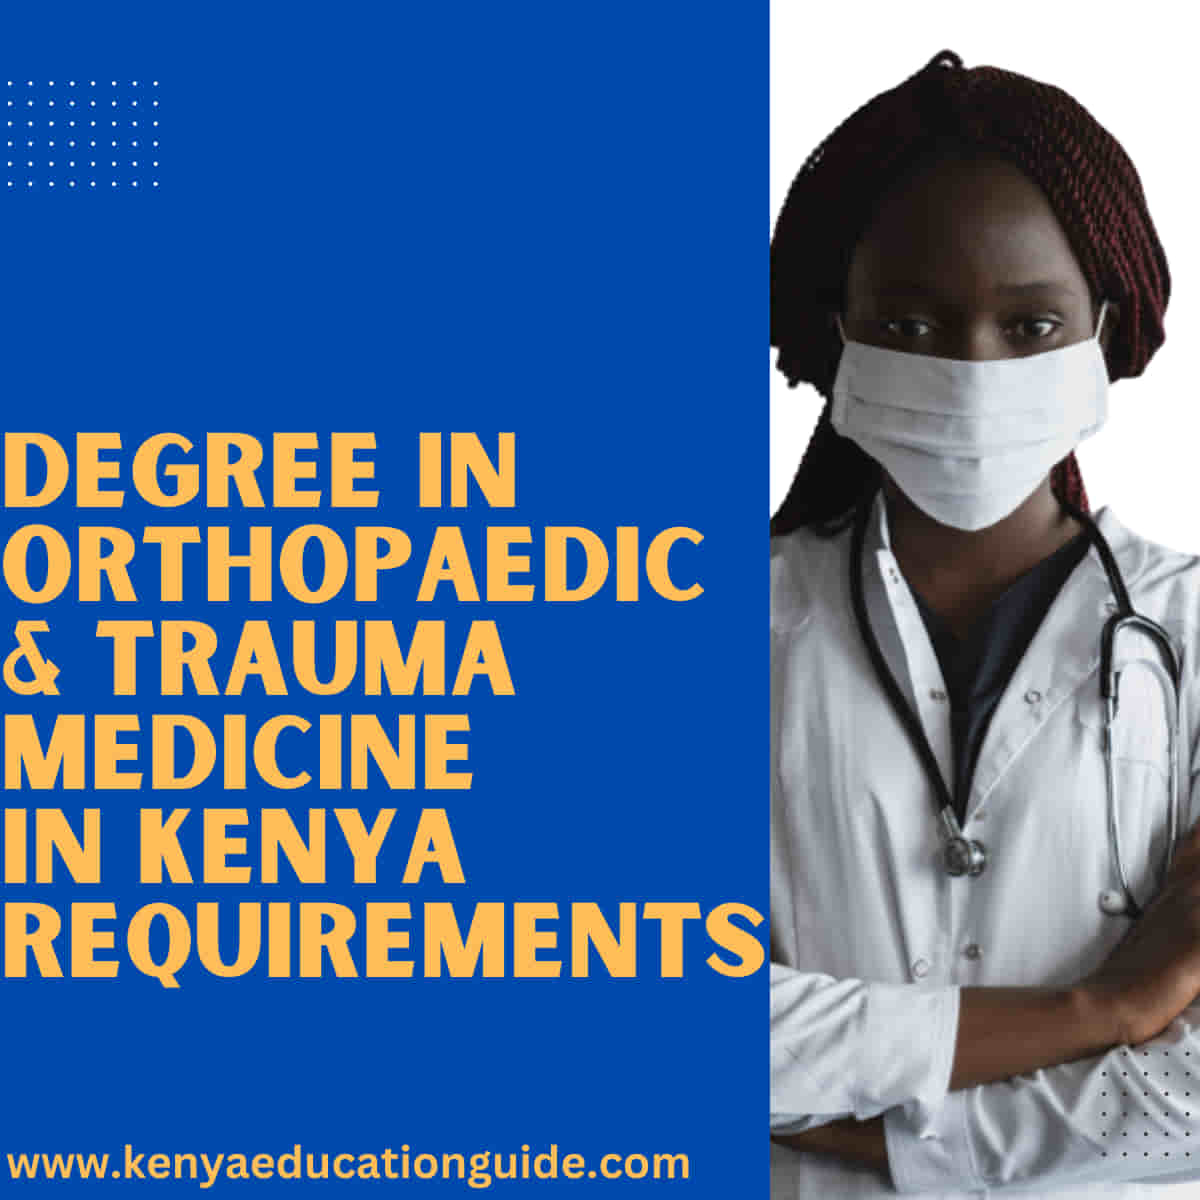 Degree in orthopaedic and trauma medicine in Kenya requirements